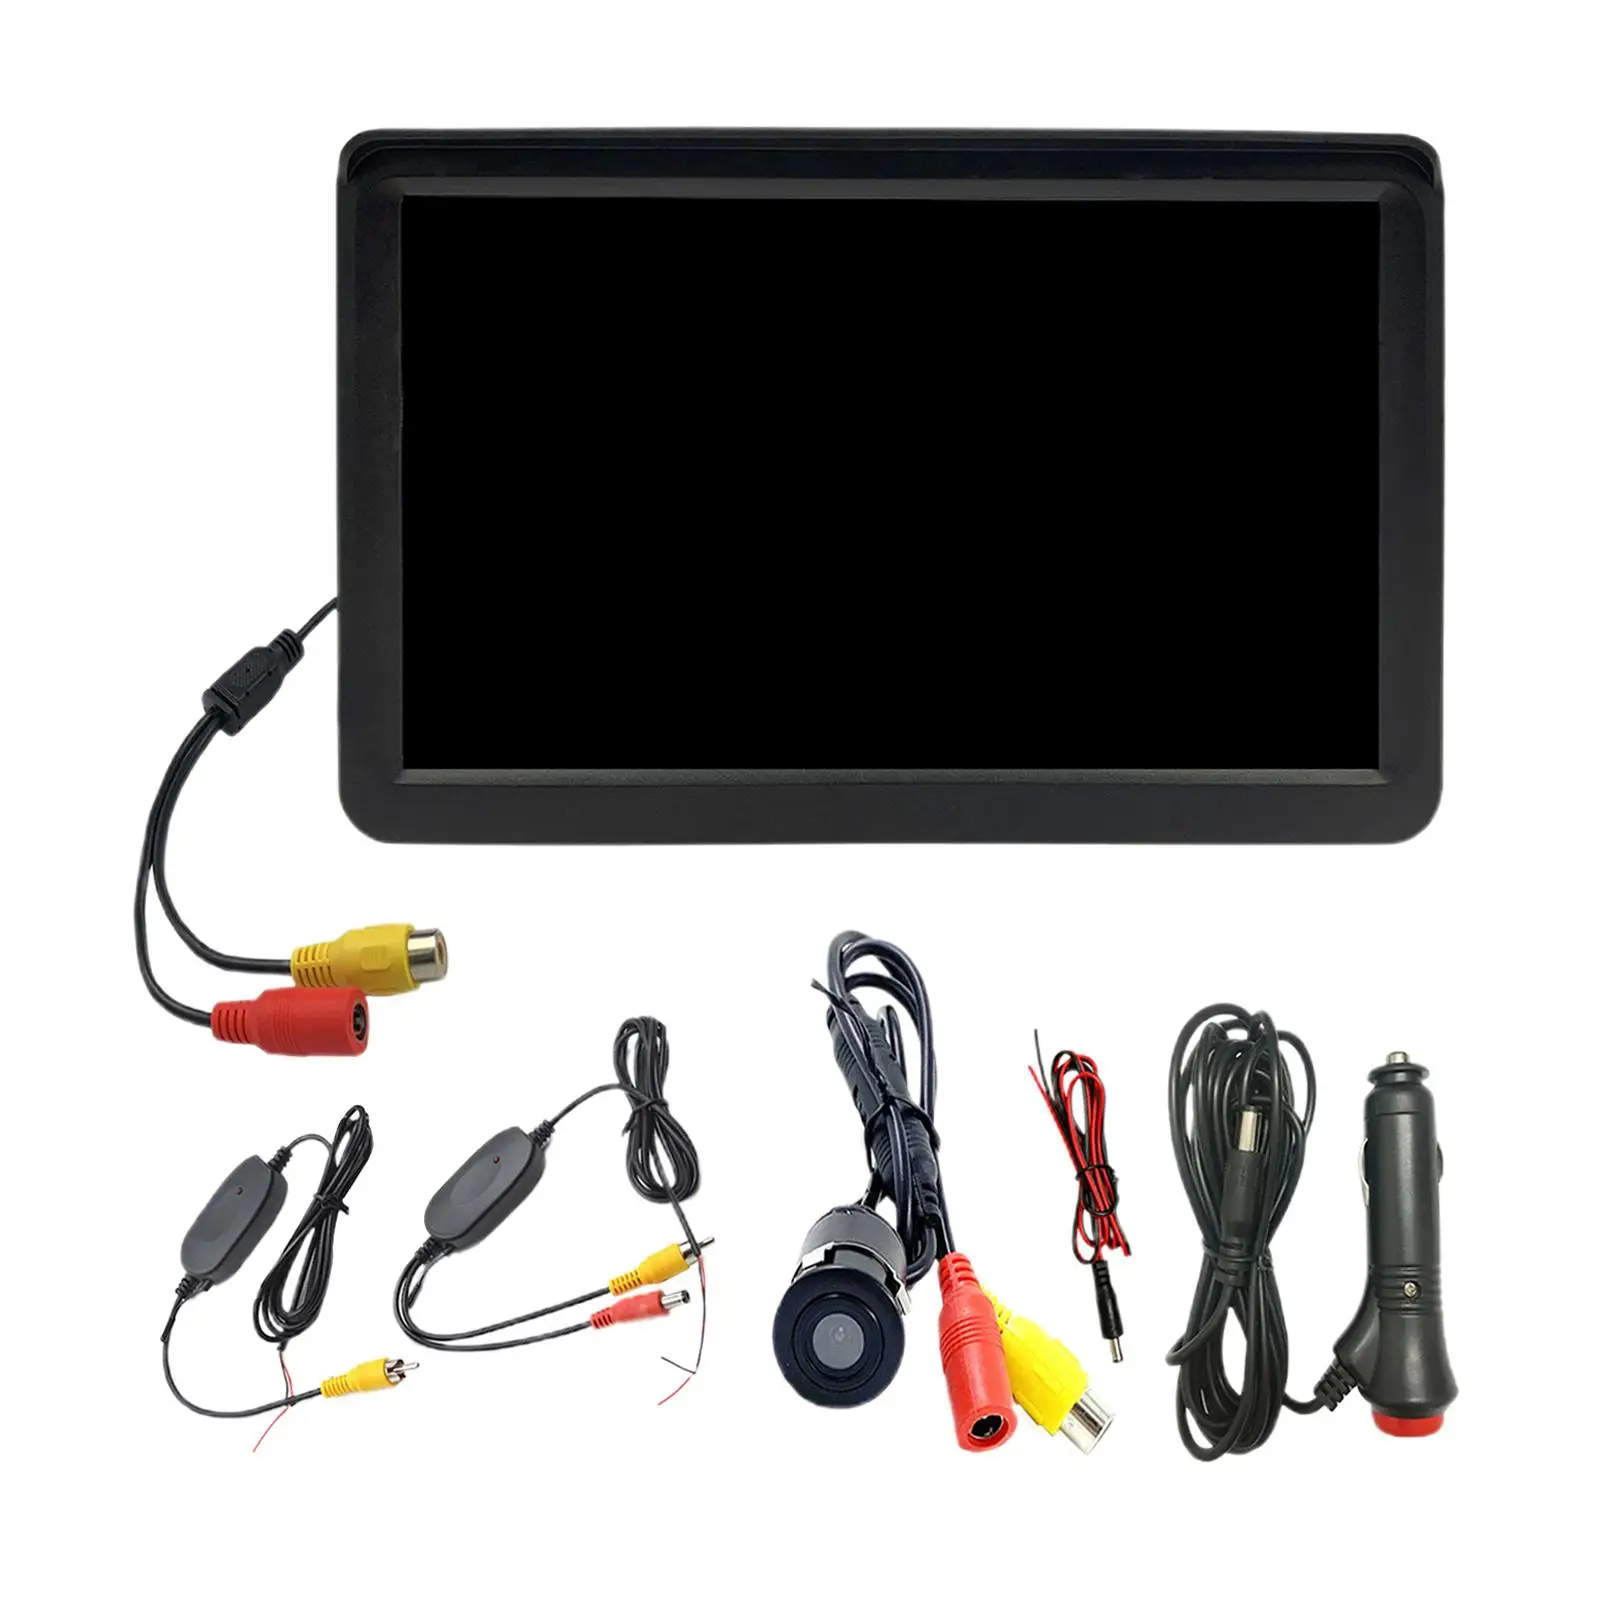 7 in Rear  LCD Monitor   Receiver Trainsmitter 12 Camera, Park Assist, 170° Wide Angle, Scale Lines